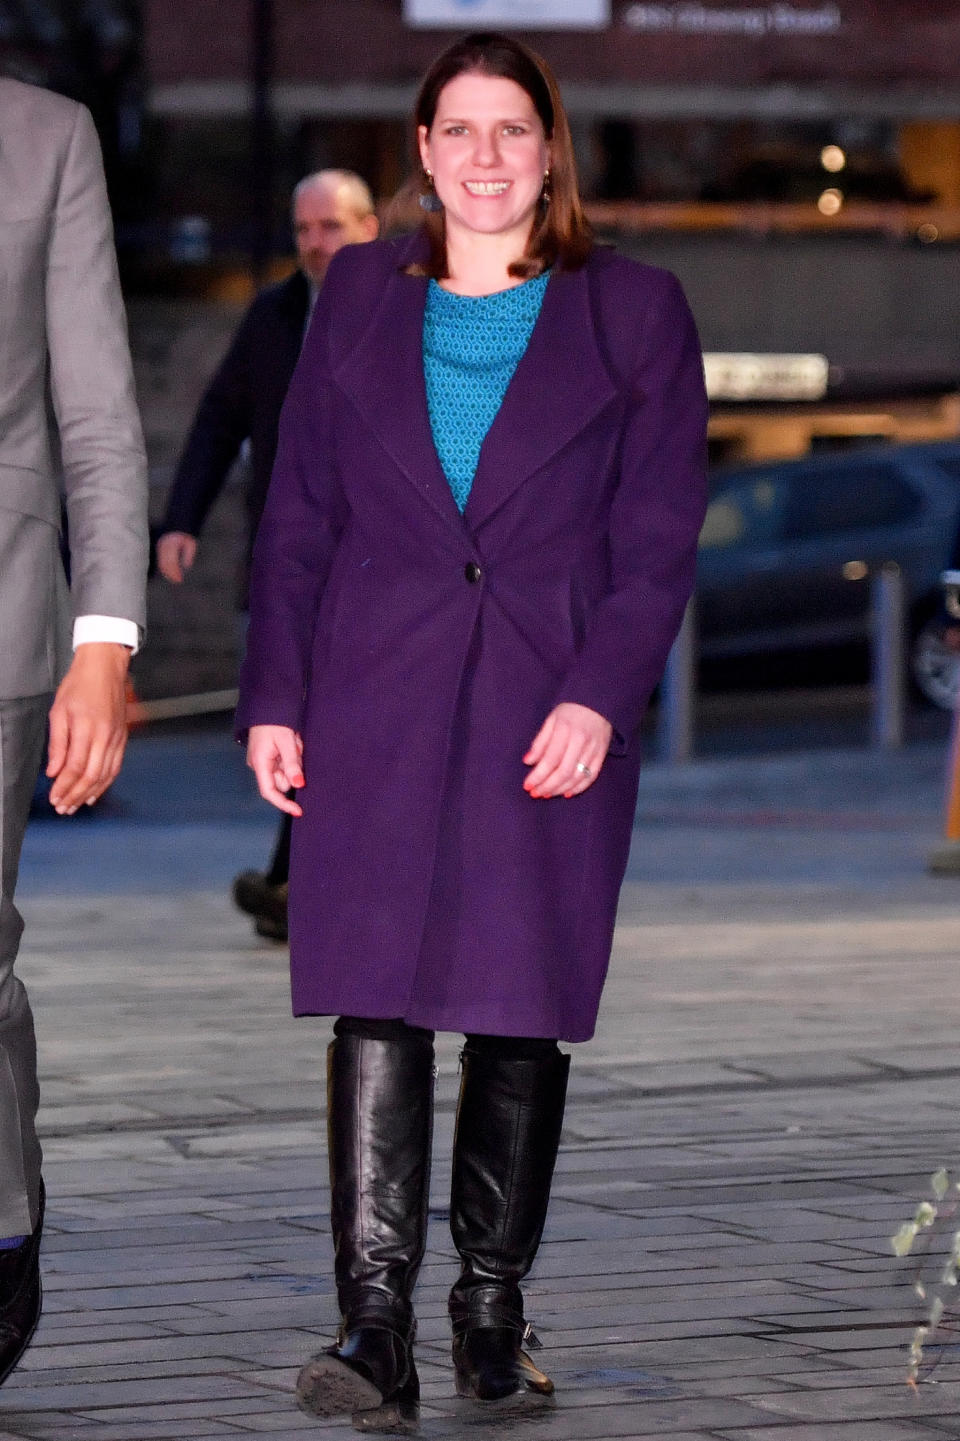 SHEFFIELD, UNITED KINGDOM - NOVEMBER 22:  Leader of the Liberal Democrats Jo Swinson walks with Editorial Director of BBC News Kamal Ahmed as she arrives to take part in BBC Question Time leaders' special at The Octagon Centre on November 22, 2019 in Sheffield, England.  The leaders of the Conservatives, Labour, Liberal Democrats and the SNP will be taking part in the live General Election Question Time special, hosted by Fiona Bruce, and will each have 30 minutes to answer questions from the audience. (Photo by Anthony Devlin/Getty Images)